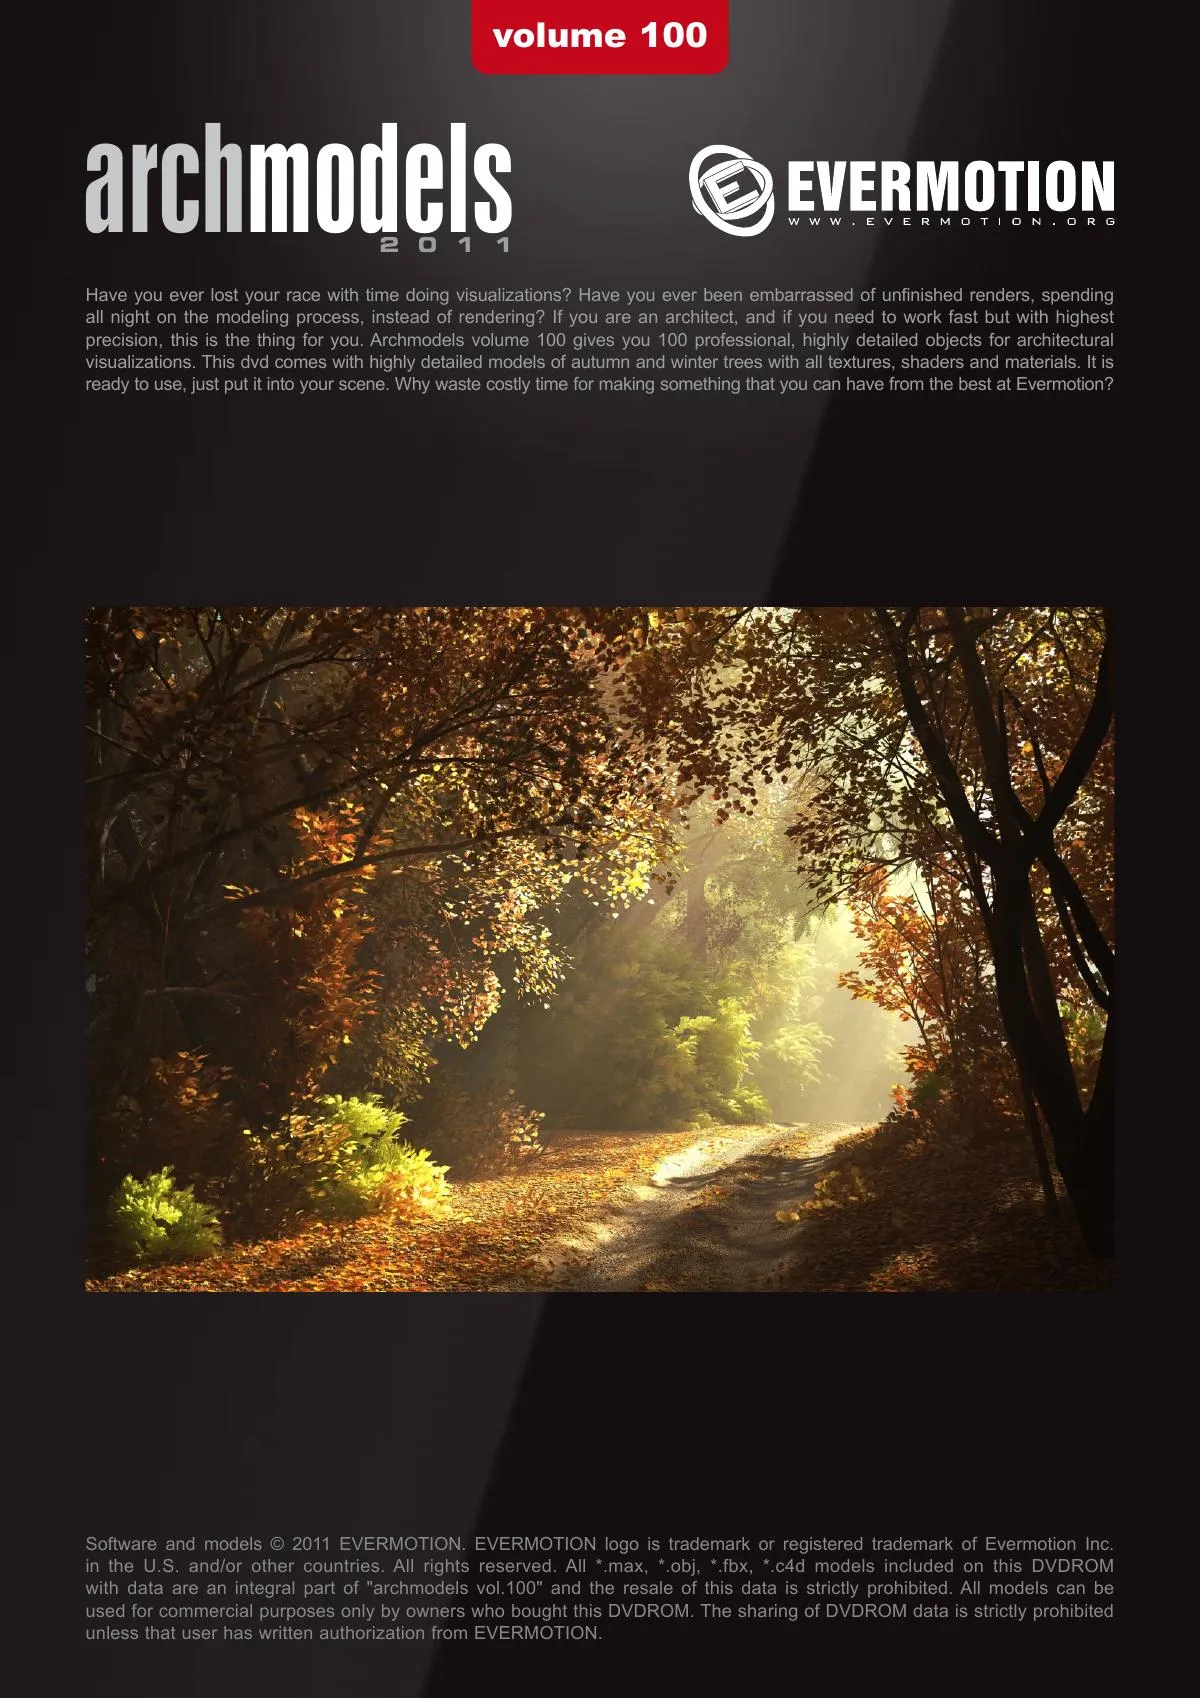 Evermotion Archmodels Vol 100 [Autumn and winter trees]